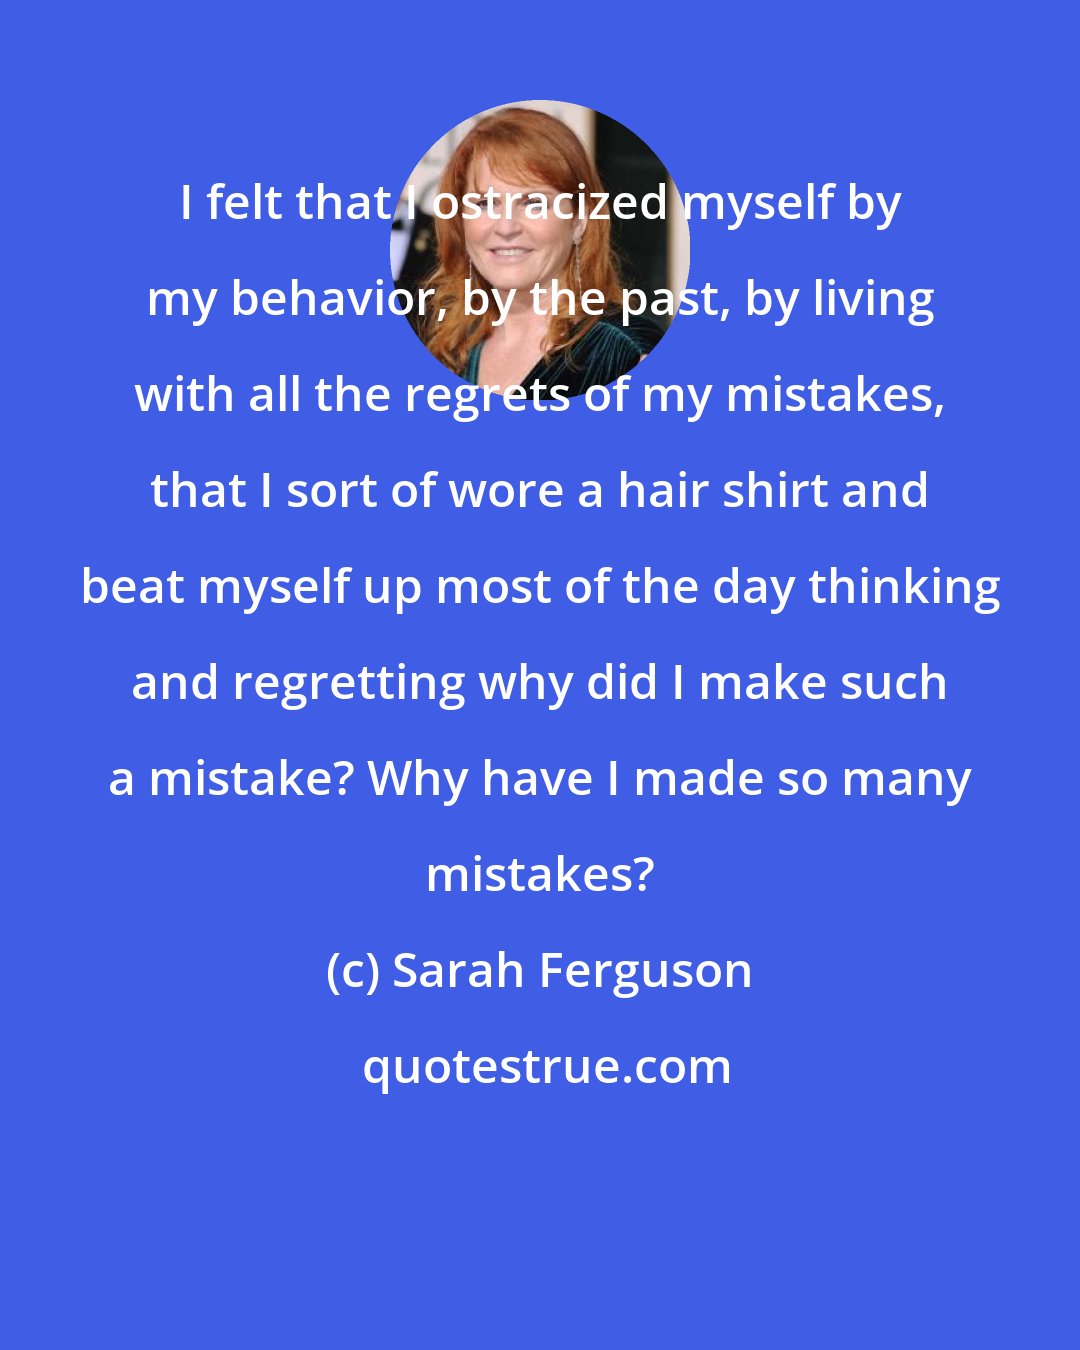 Sarah Ferguson: I felt that I ostracized myself by my behavior, by the past, by living with all the regrets of my mistakes, that I sort of wore a hair shirt and beat myself up most of the day thinking and regretting why did I make such a mistake? Why have I made so many mistakes?